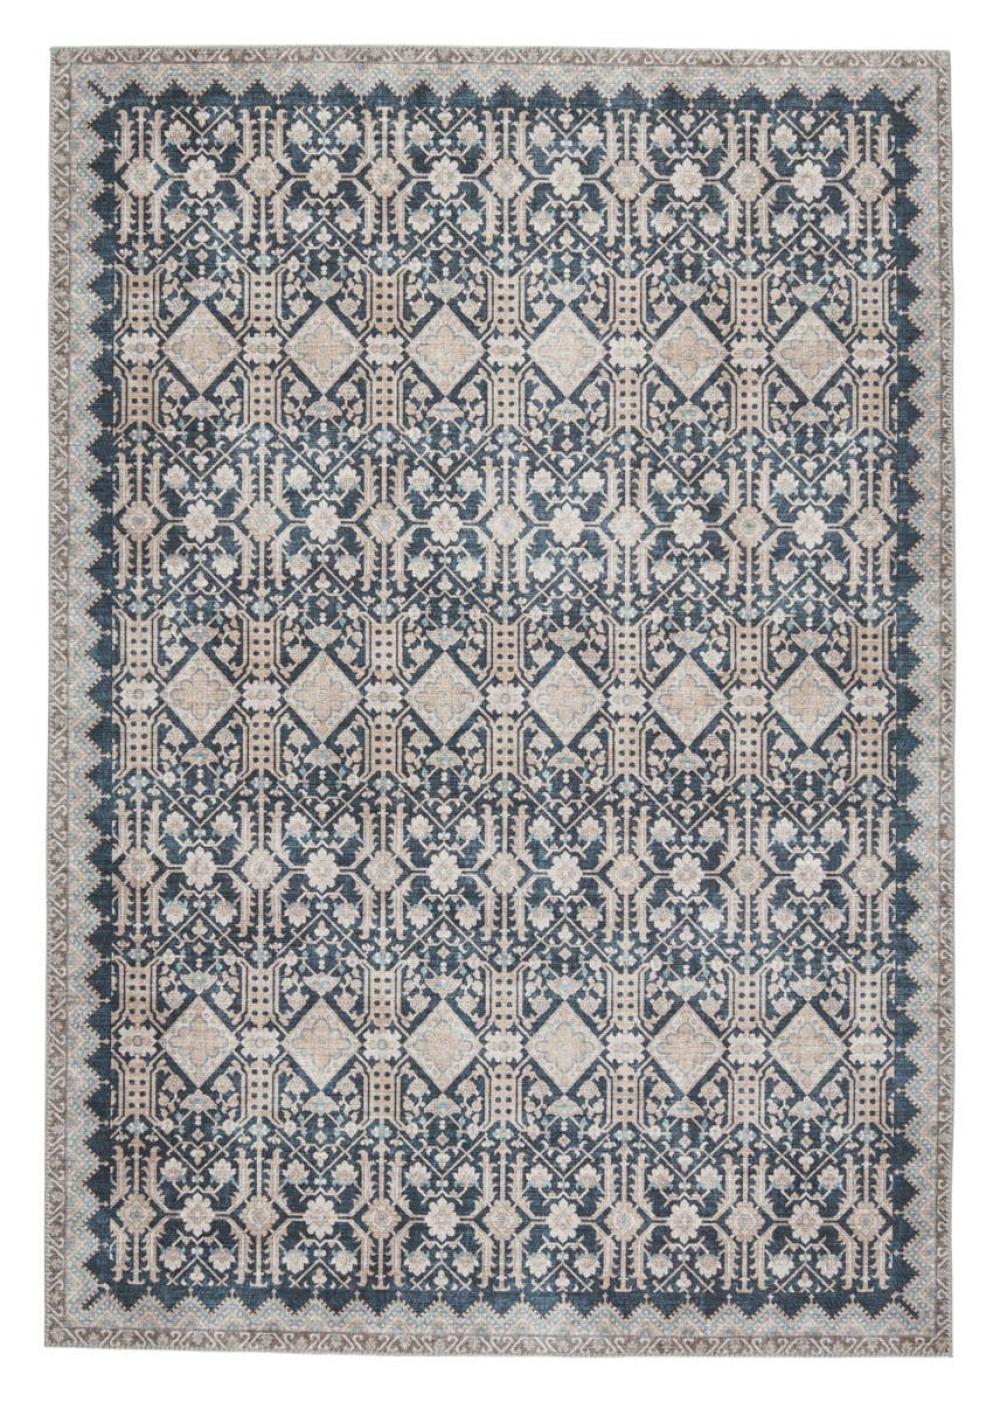 Aged charm meets contemporary chic in this blue trellis-patterned rug, perfect for elevating your space.